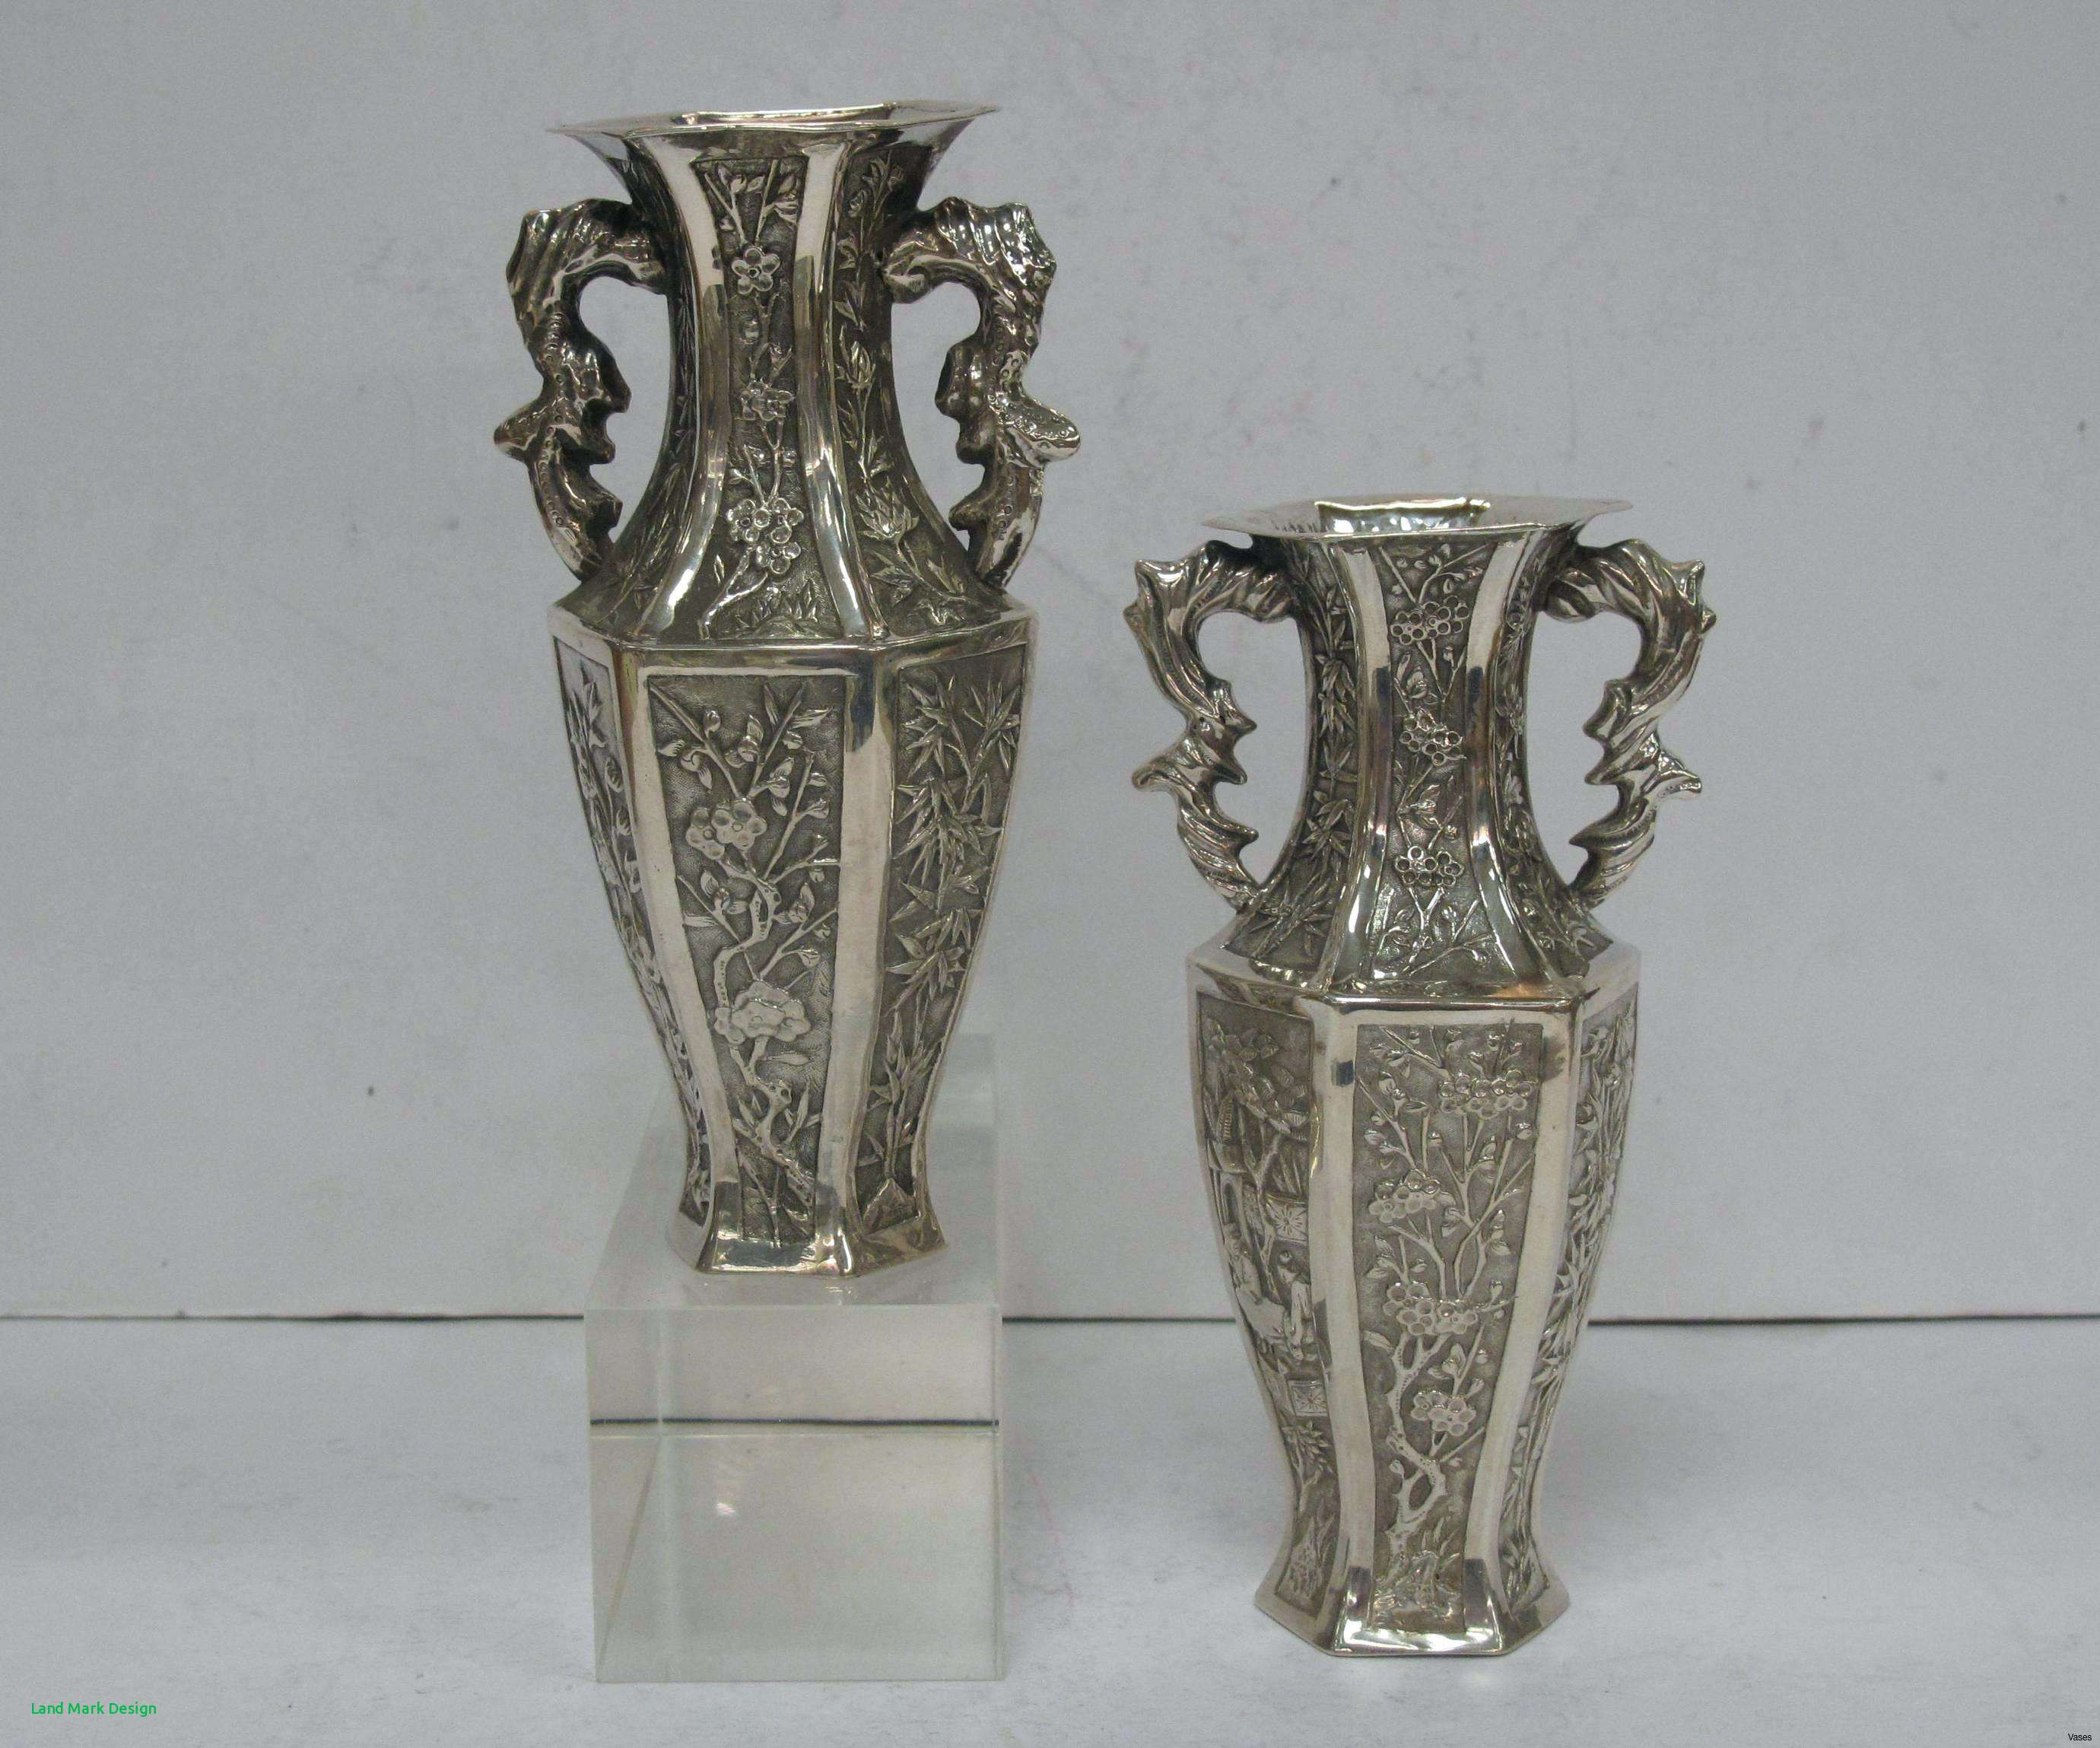 24 Nice Trumpet Vases for Sale 2024 free download trumpet vases for sale of unique crystal vase awards beginneryogaclassesnear me within 8253h vases bulk silver square glass cube vase with metallic band 6x6i 0d vases bulk silver